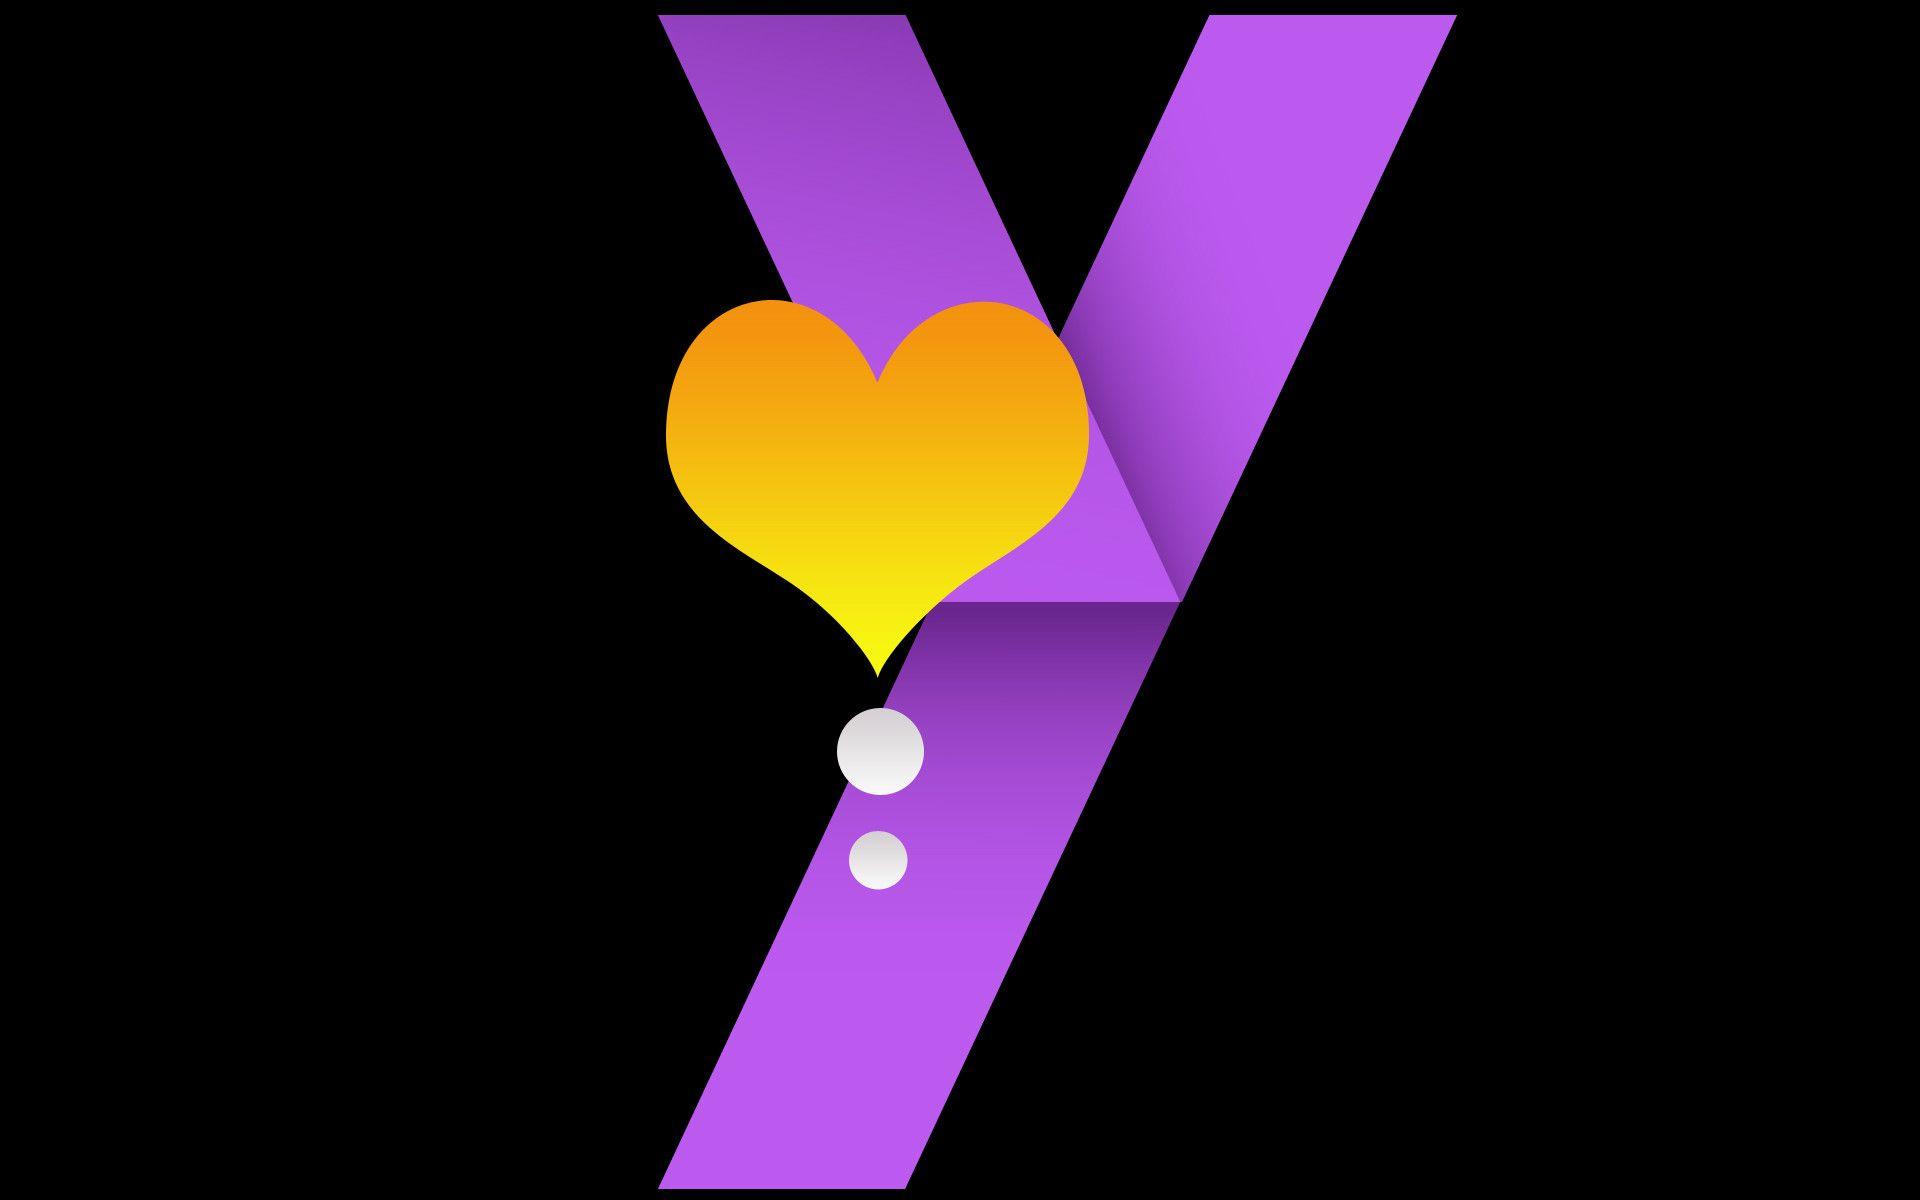 Letter y Stock Photos Royalty Free Letter y Images  Depositphotos